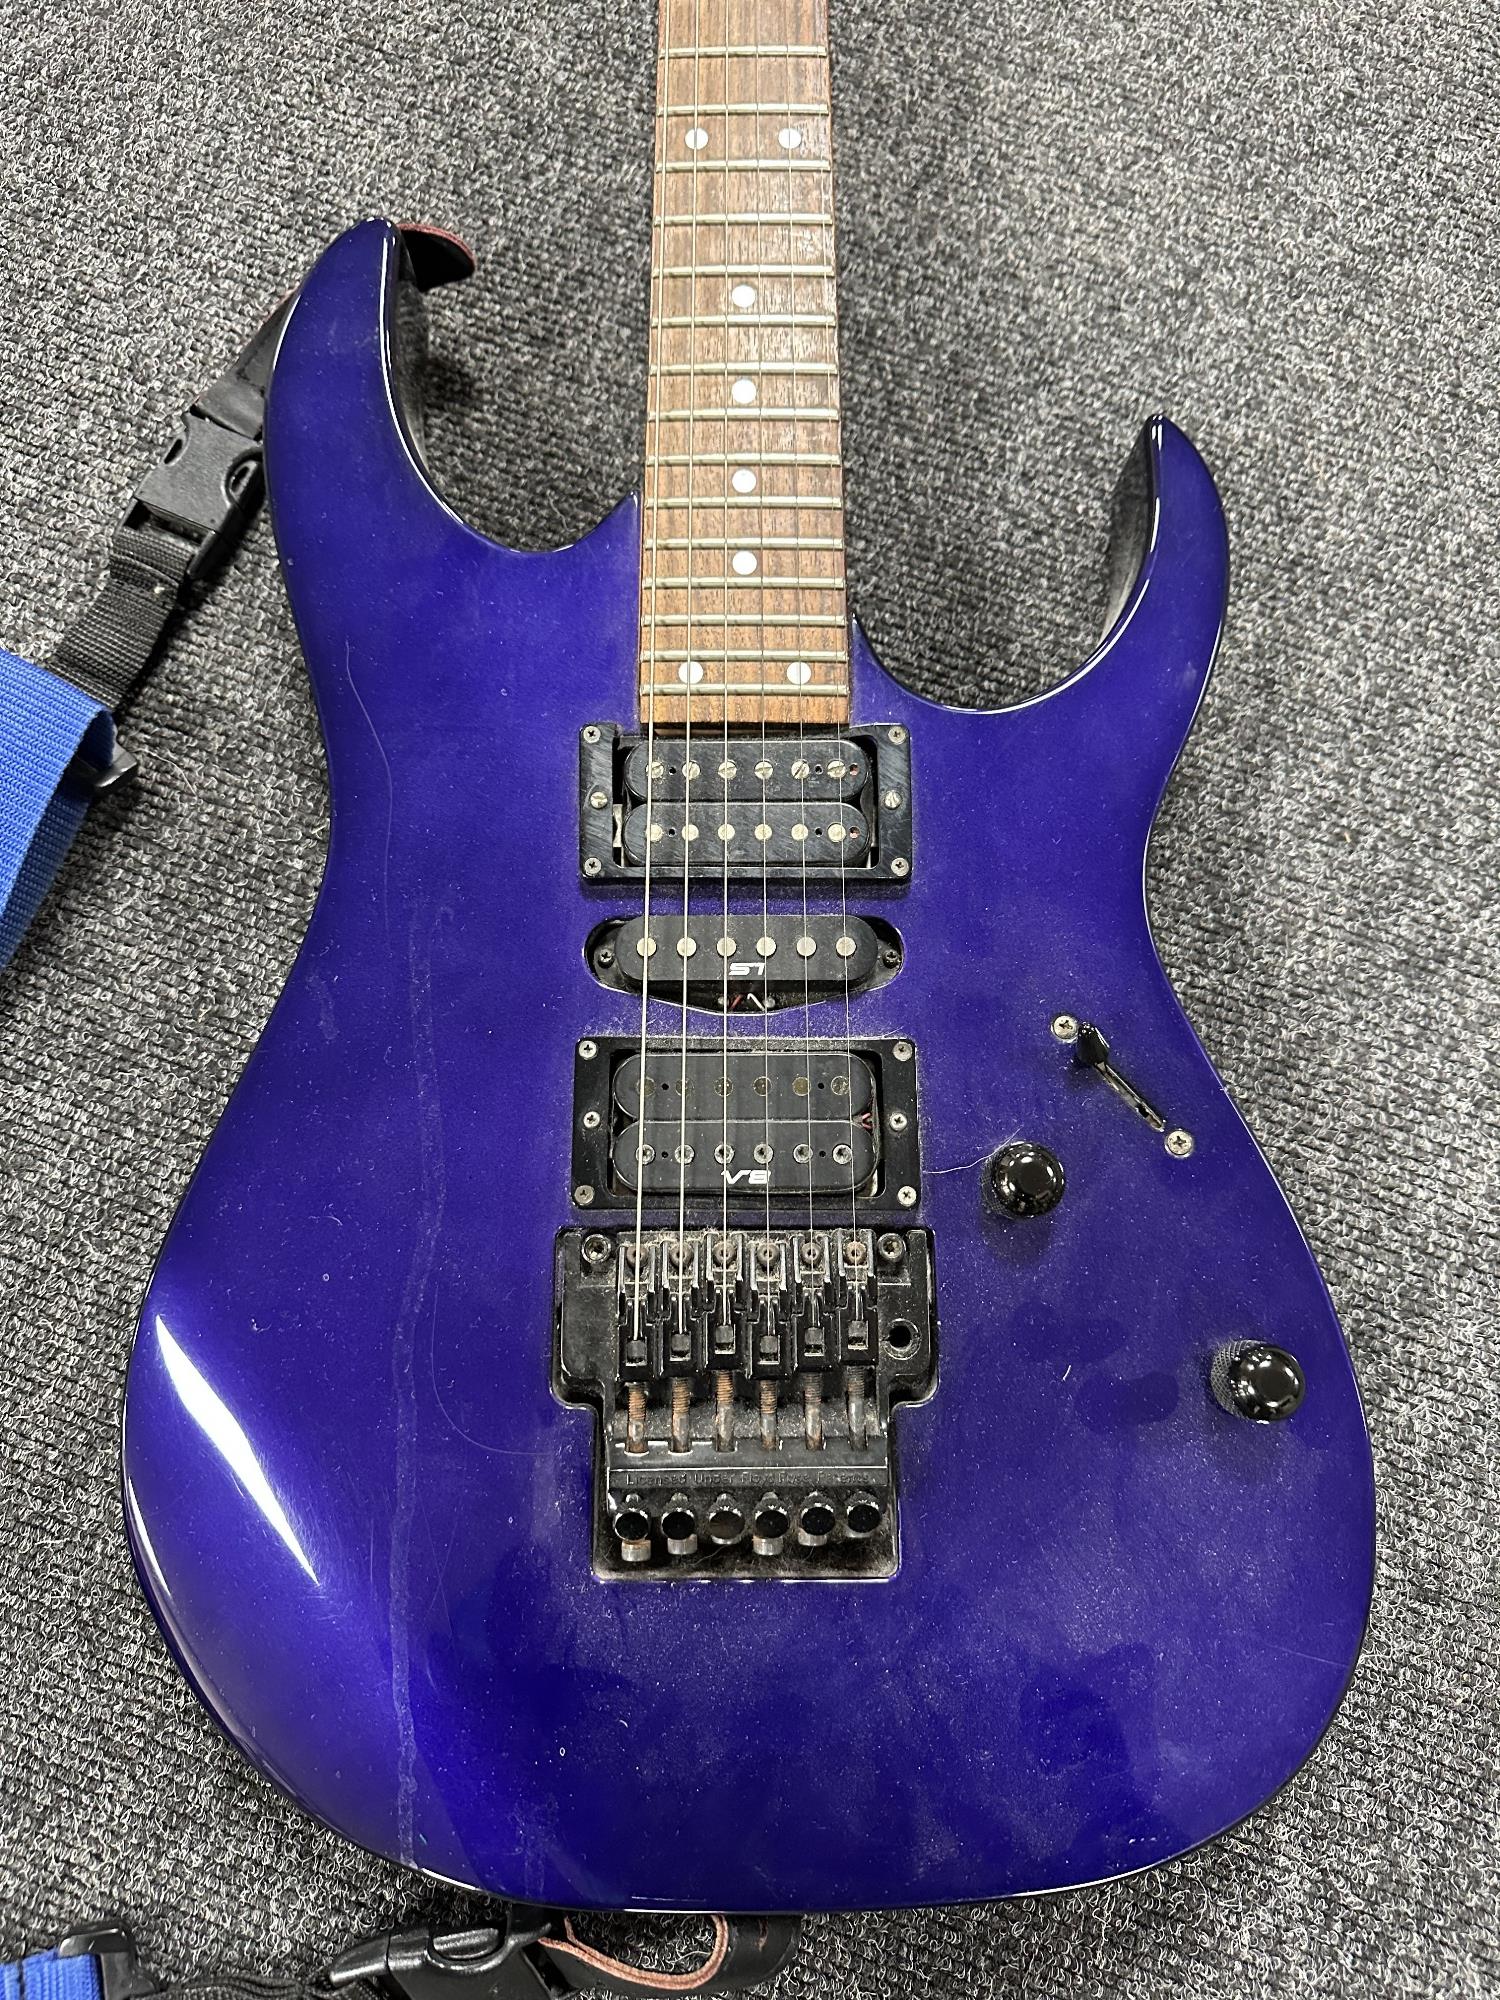 An Ibanez electric guitar, serial number F9705221, Made in Japan, in hard carry case. - Image 2 of 8